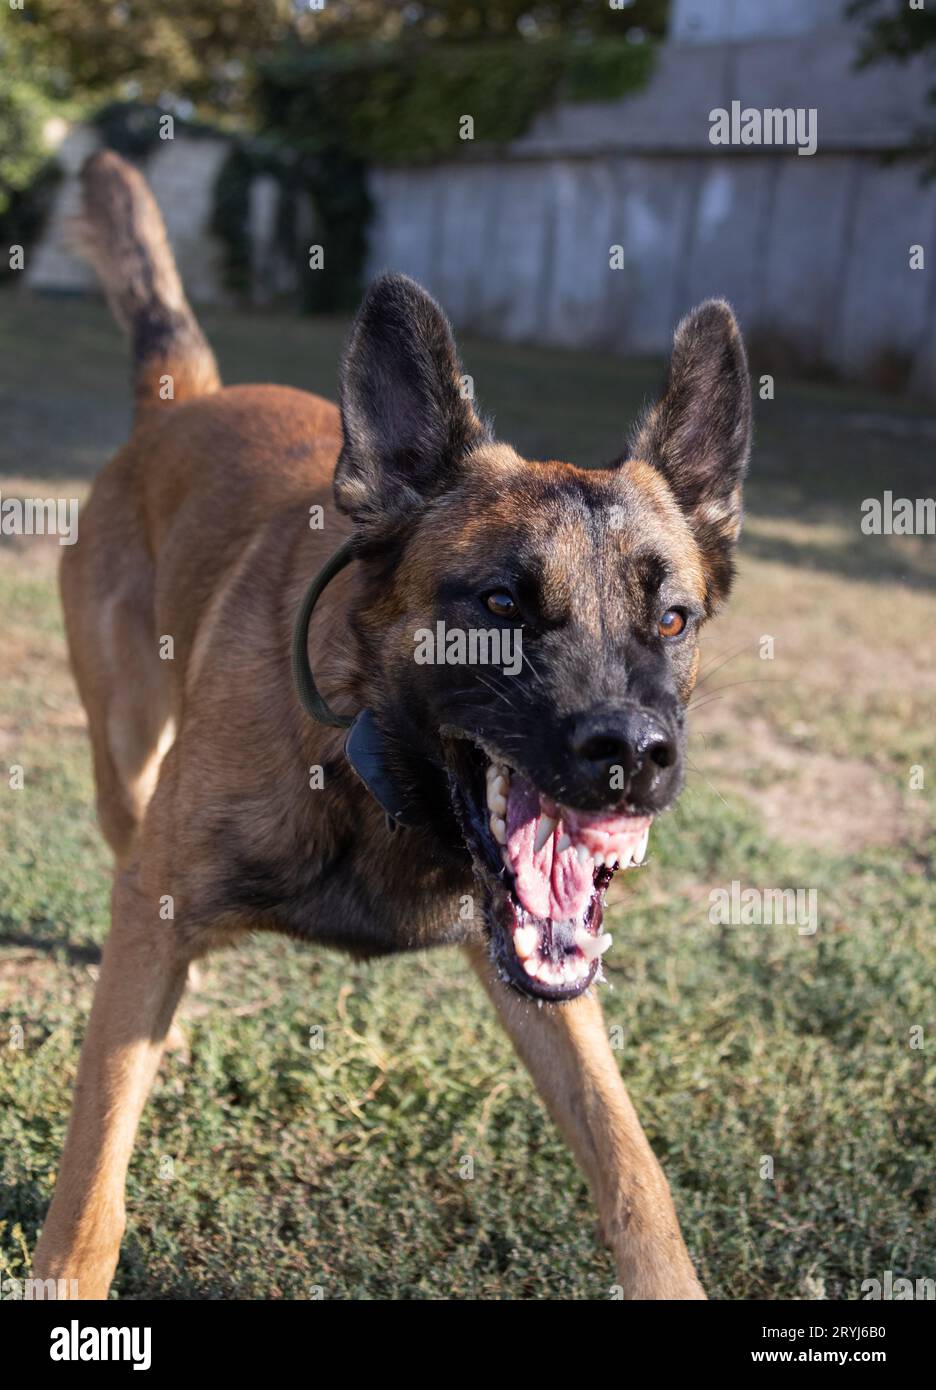 Beautiful angry Aggressive dog Belgian Shepherd Malinois grab criminal's clothes. Service dog training. Dog bites clothes. Angry attack. Evil teeth in Stock Photo